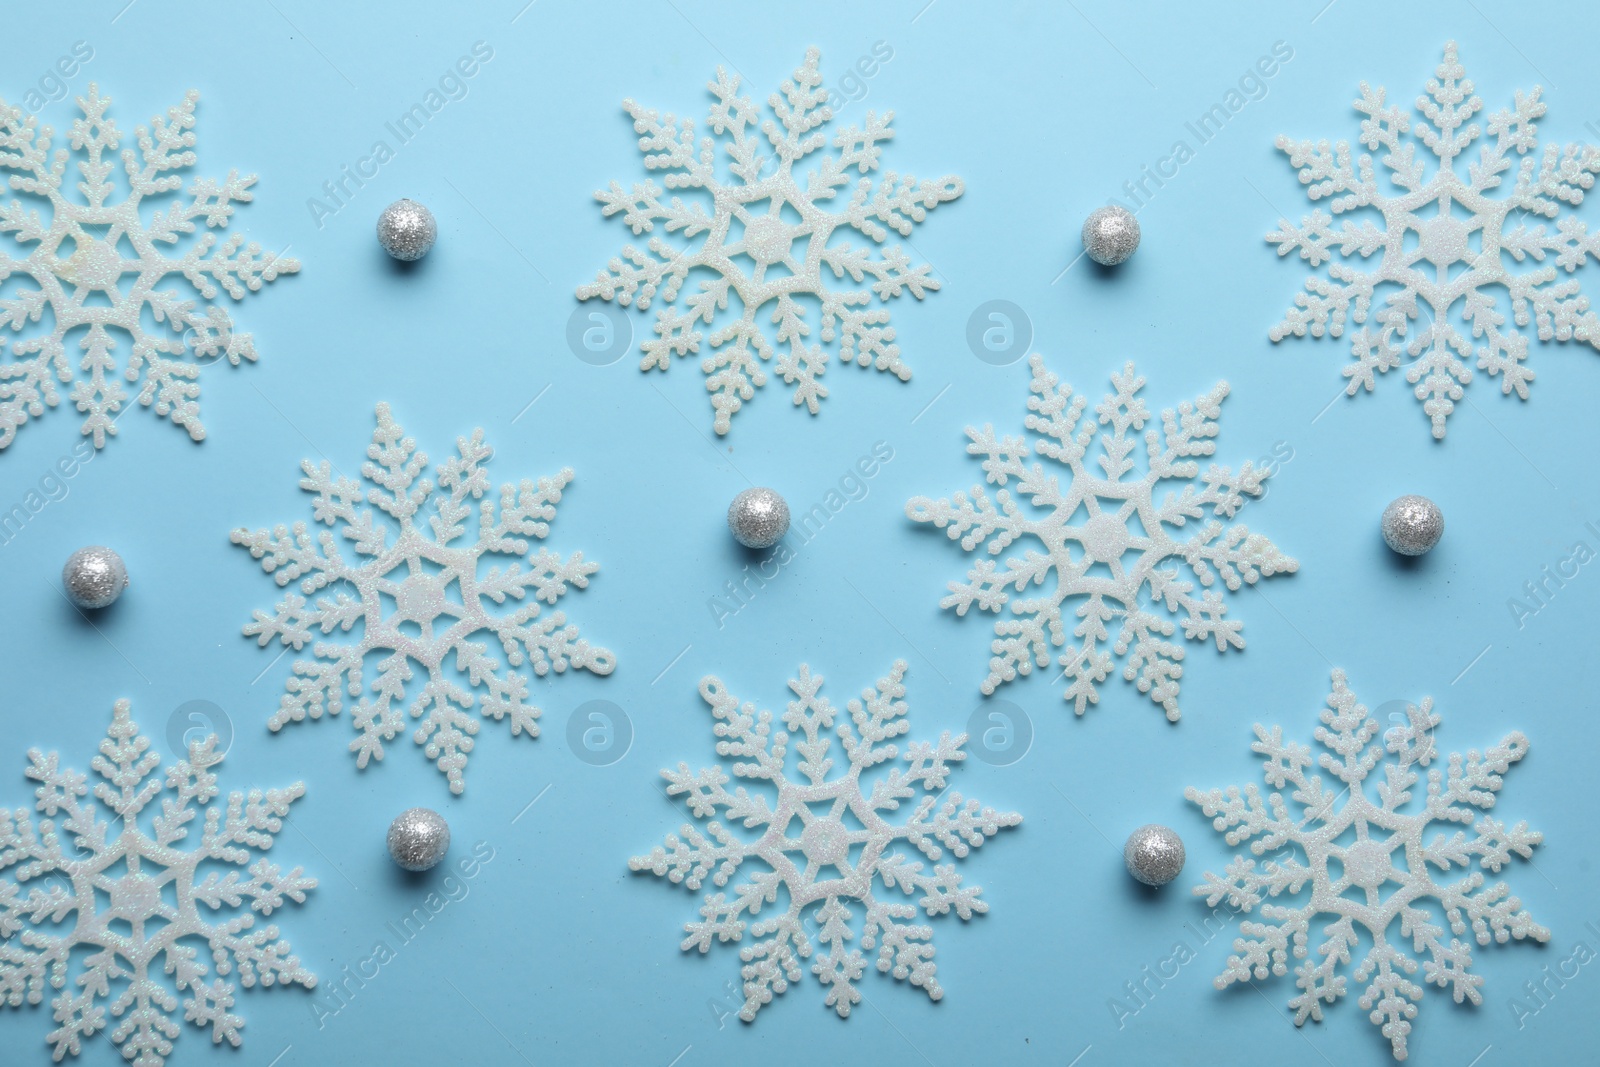 Photo of Beautiful snowflakes and decorative balls on light blue background, flat lay